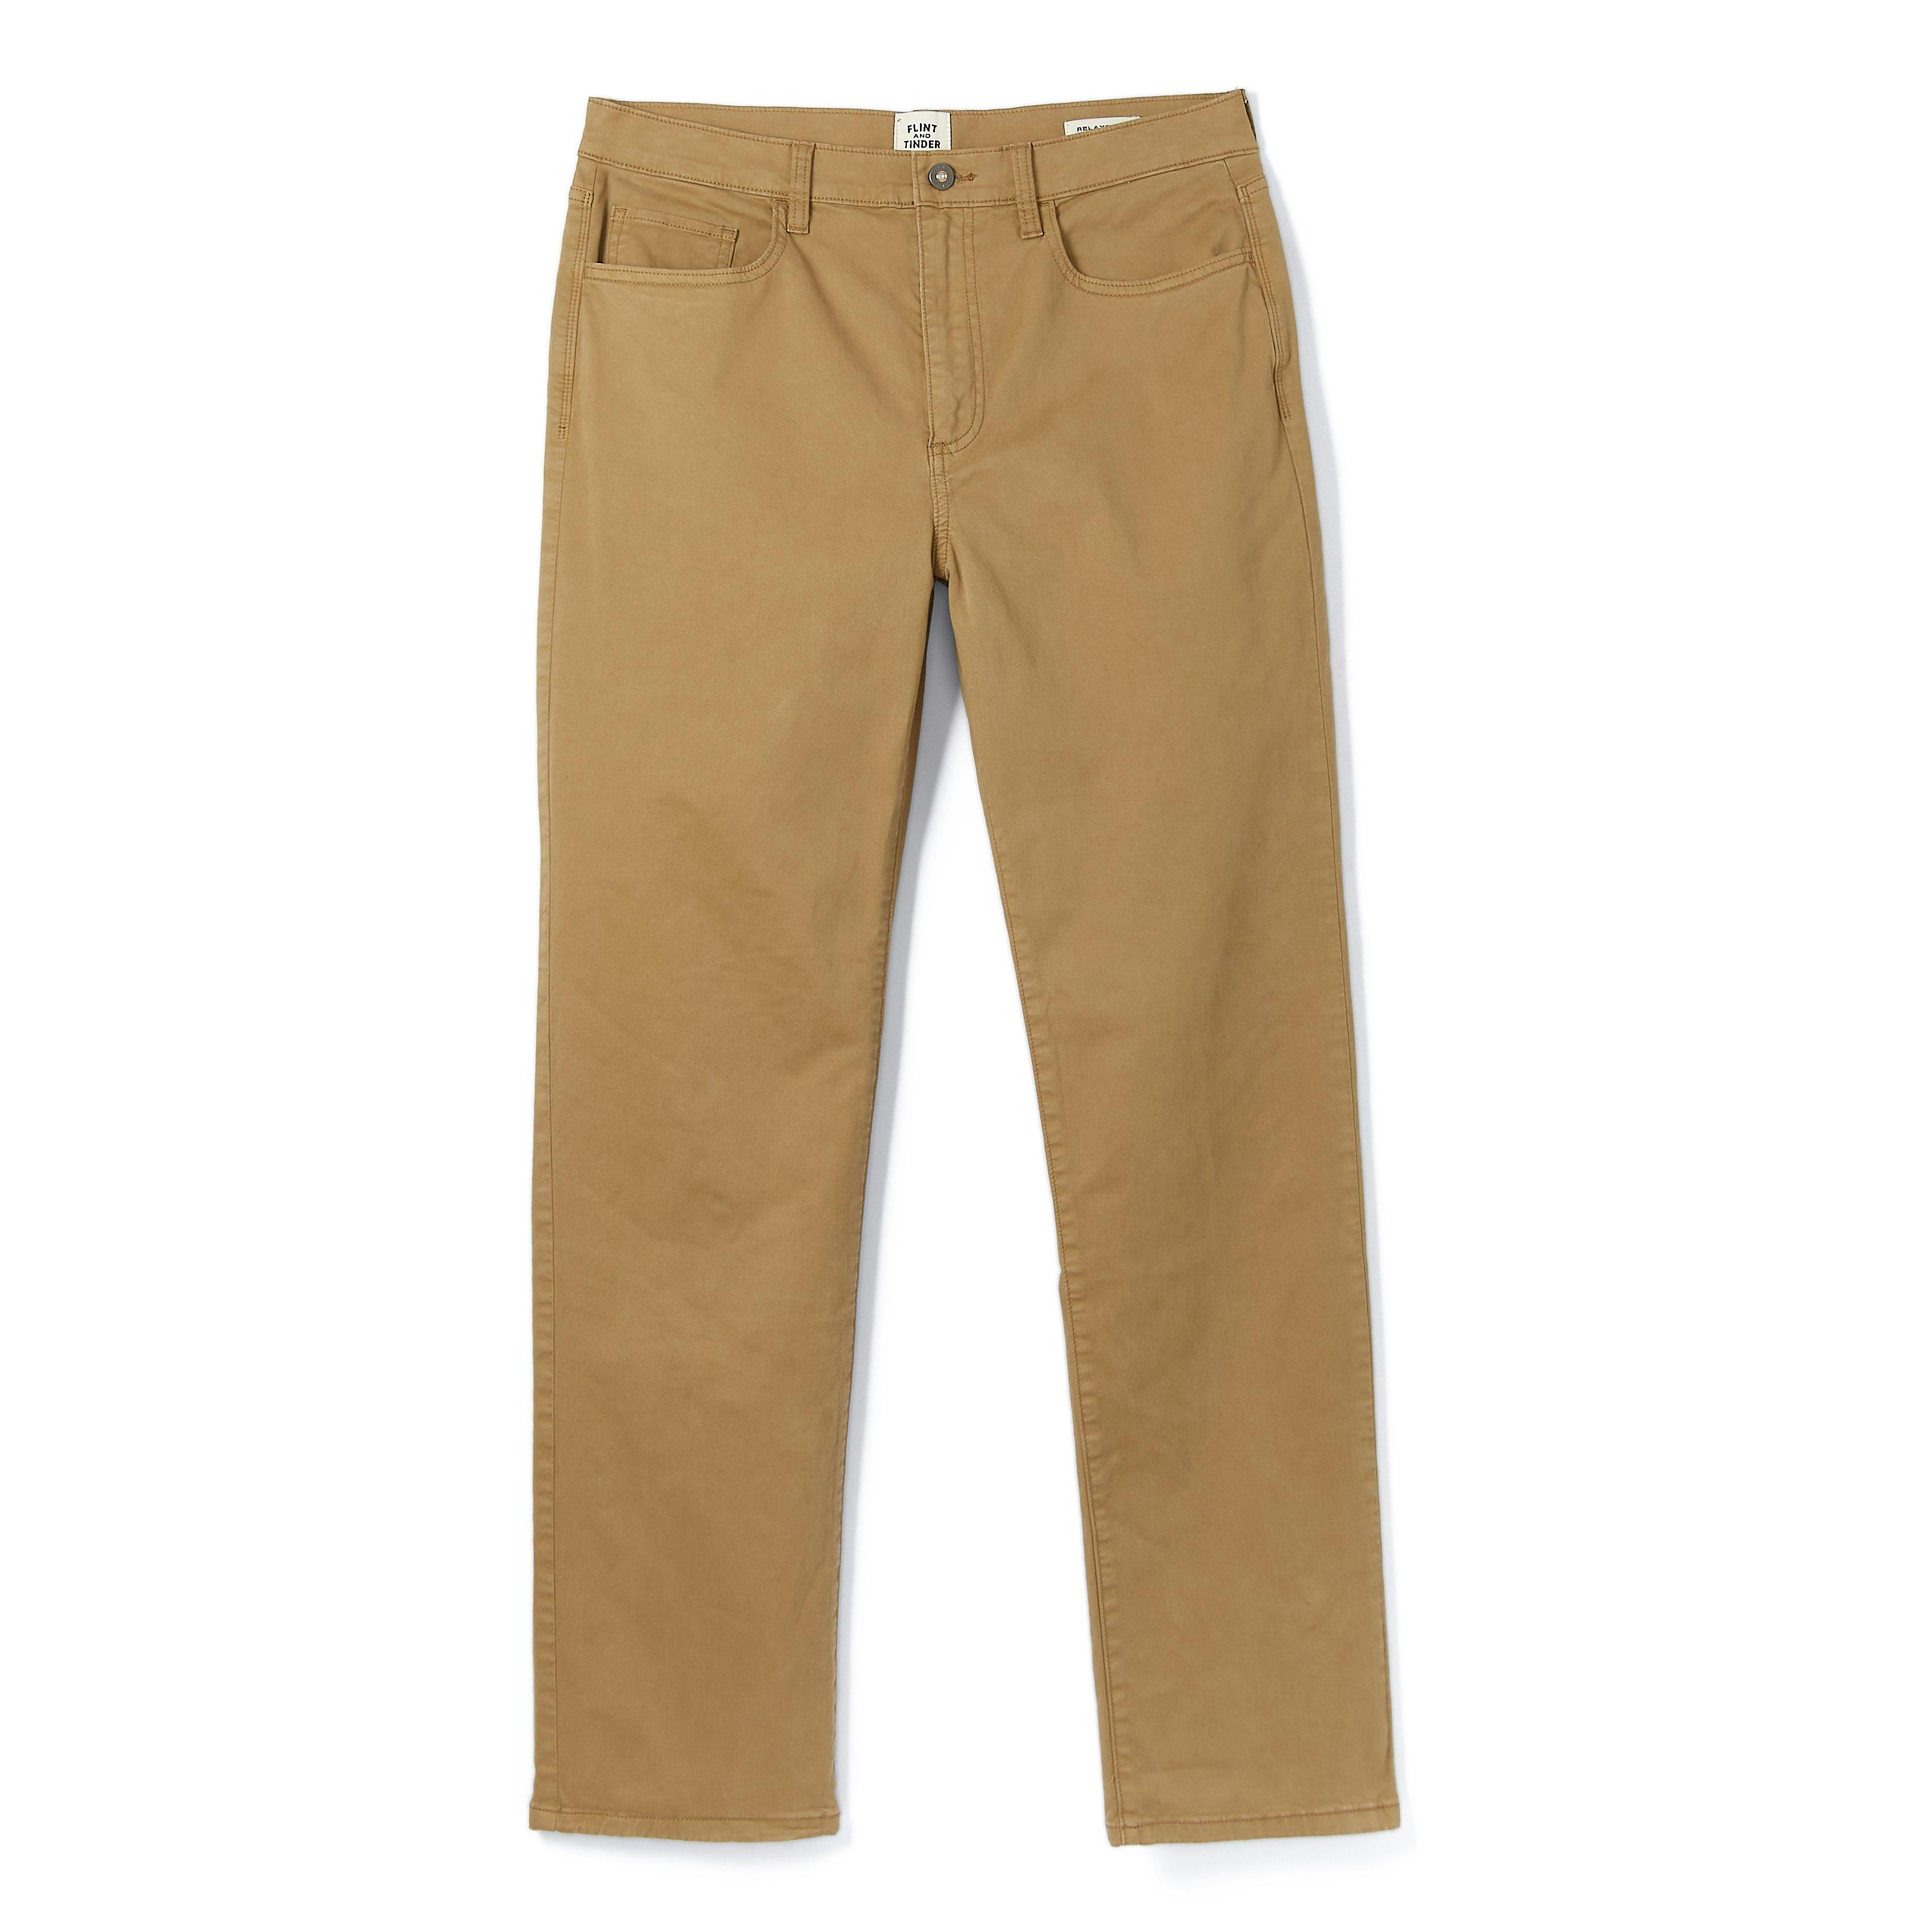 Flint and Tinder 365 Corduroy Pant - Straight - Earth, Casual Pants